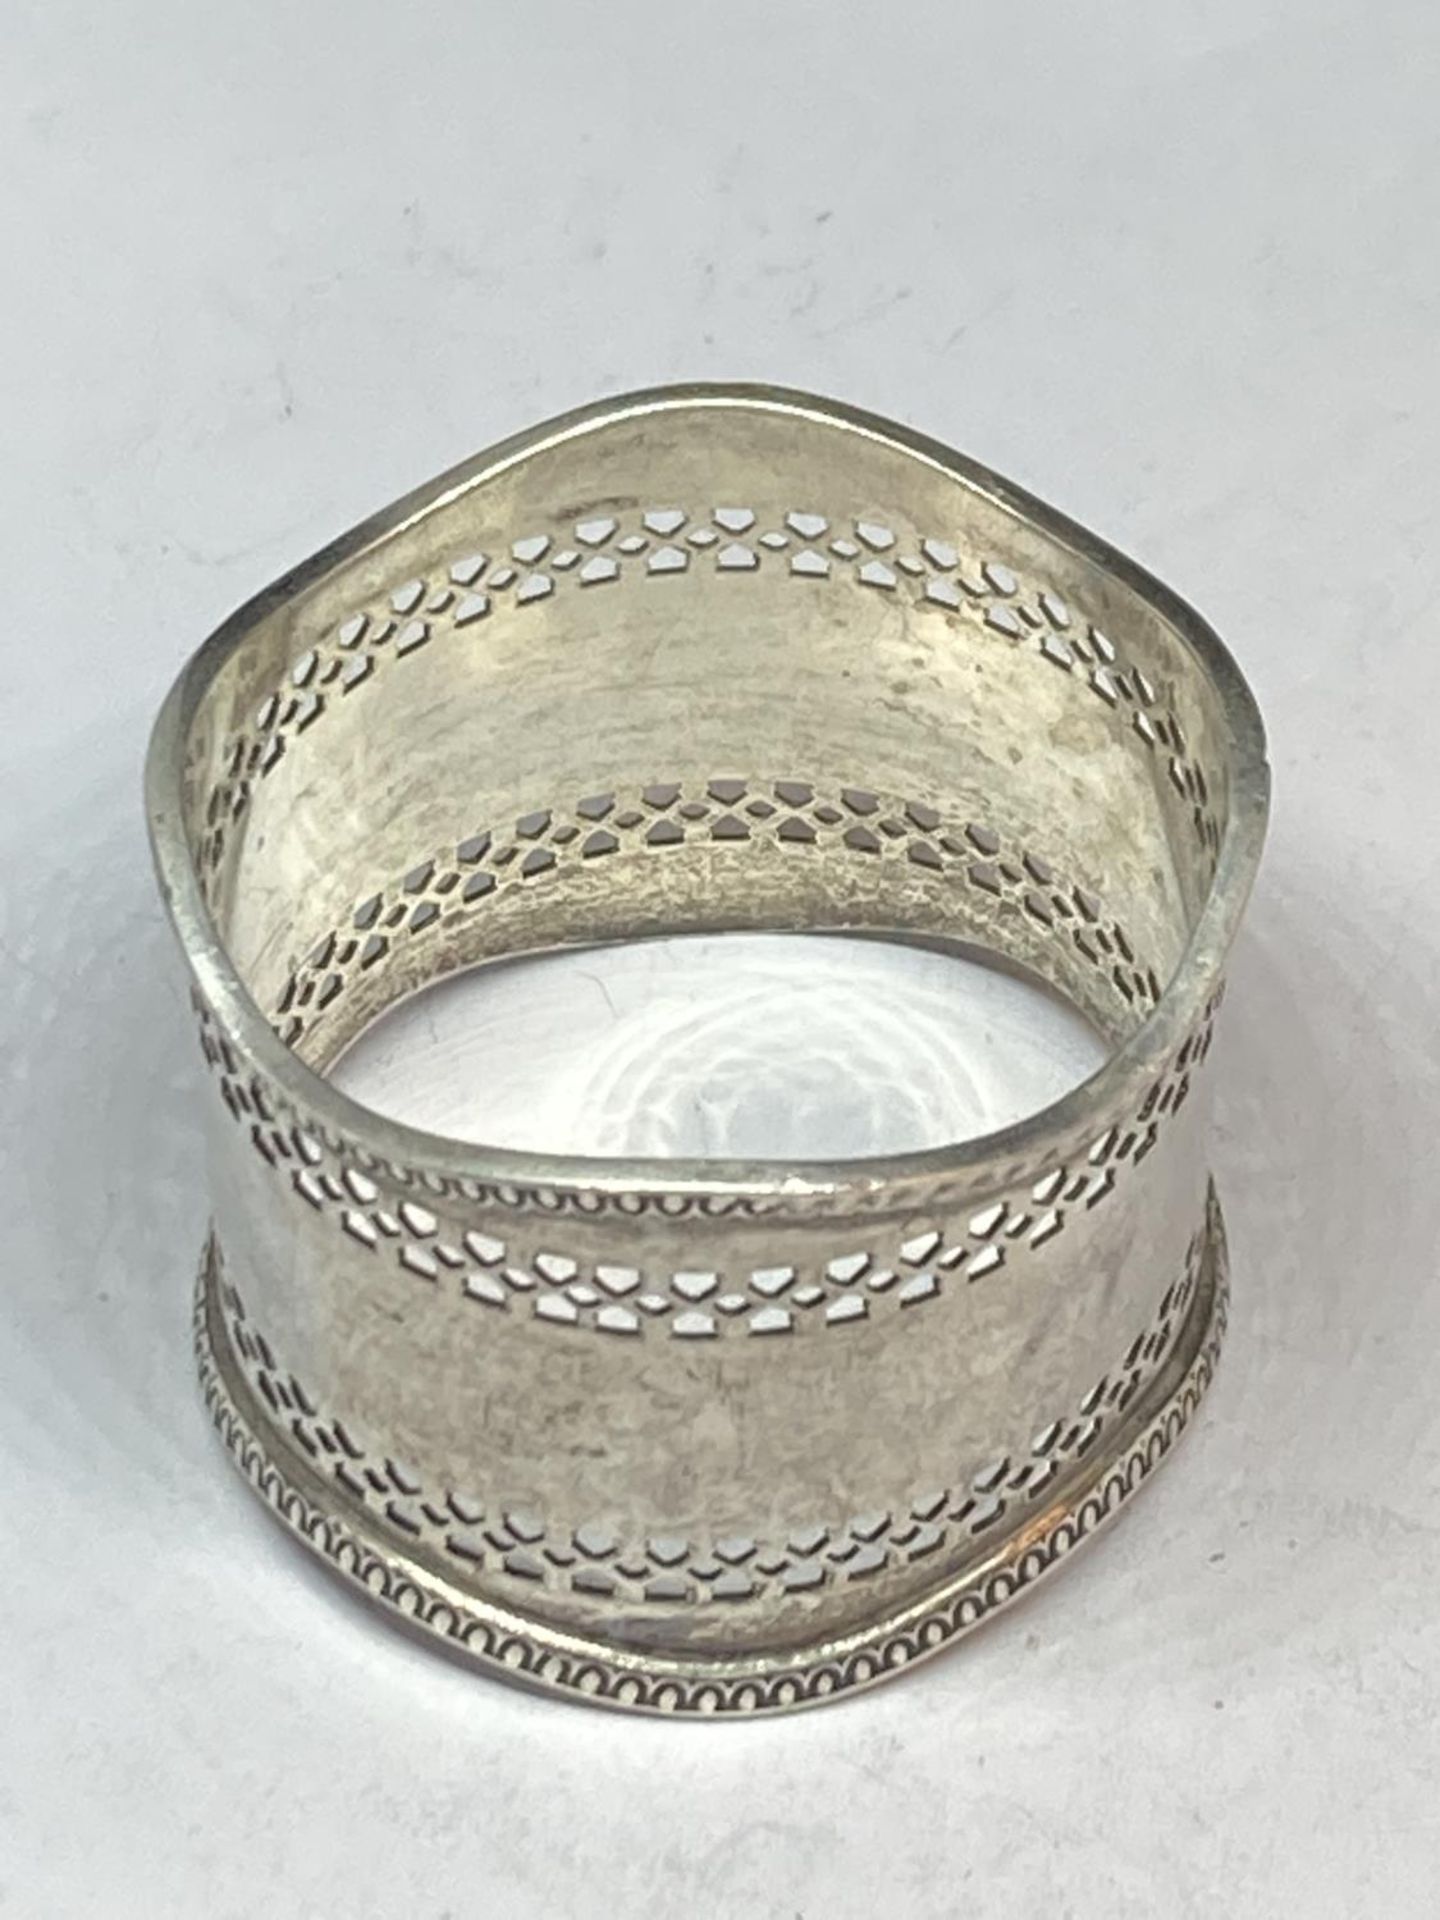 A HALLMARKED BIRMINGHAM SILVER NAPKIN RING GROSS WEIGHT 28.9 GRAMS - Image 2 of 3